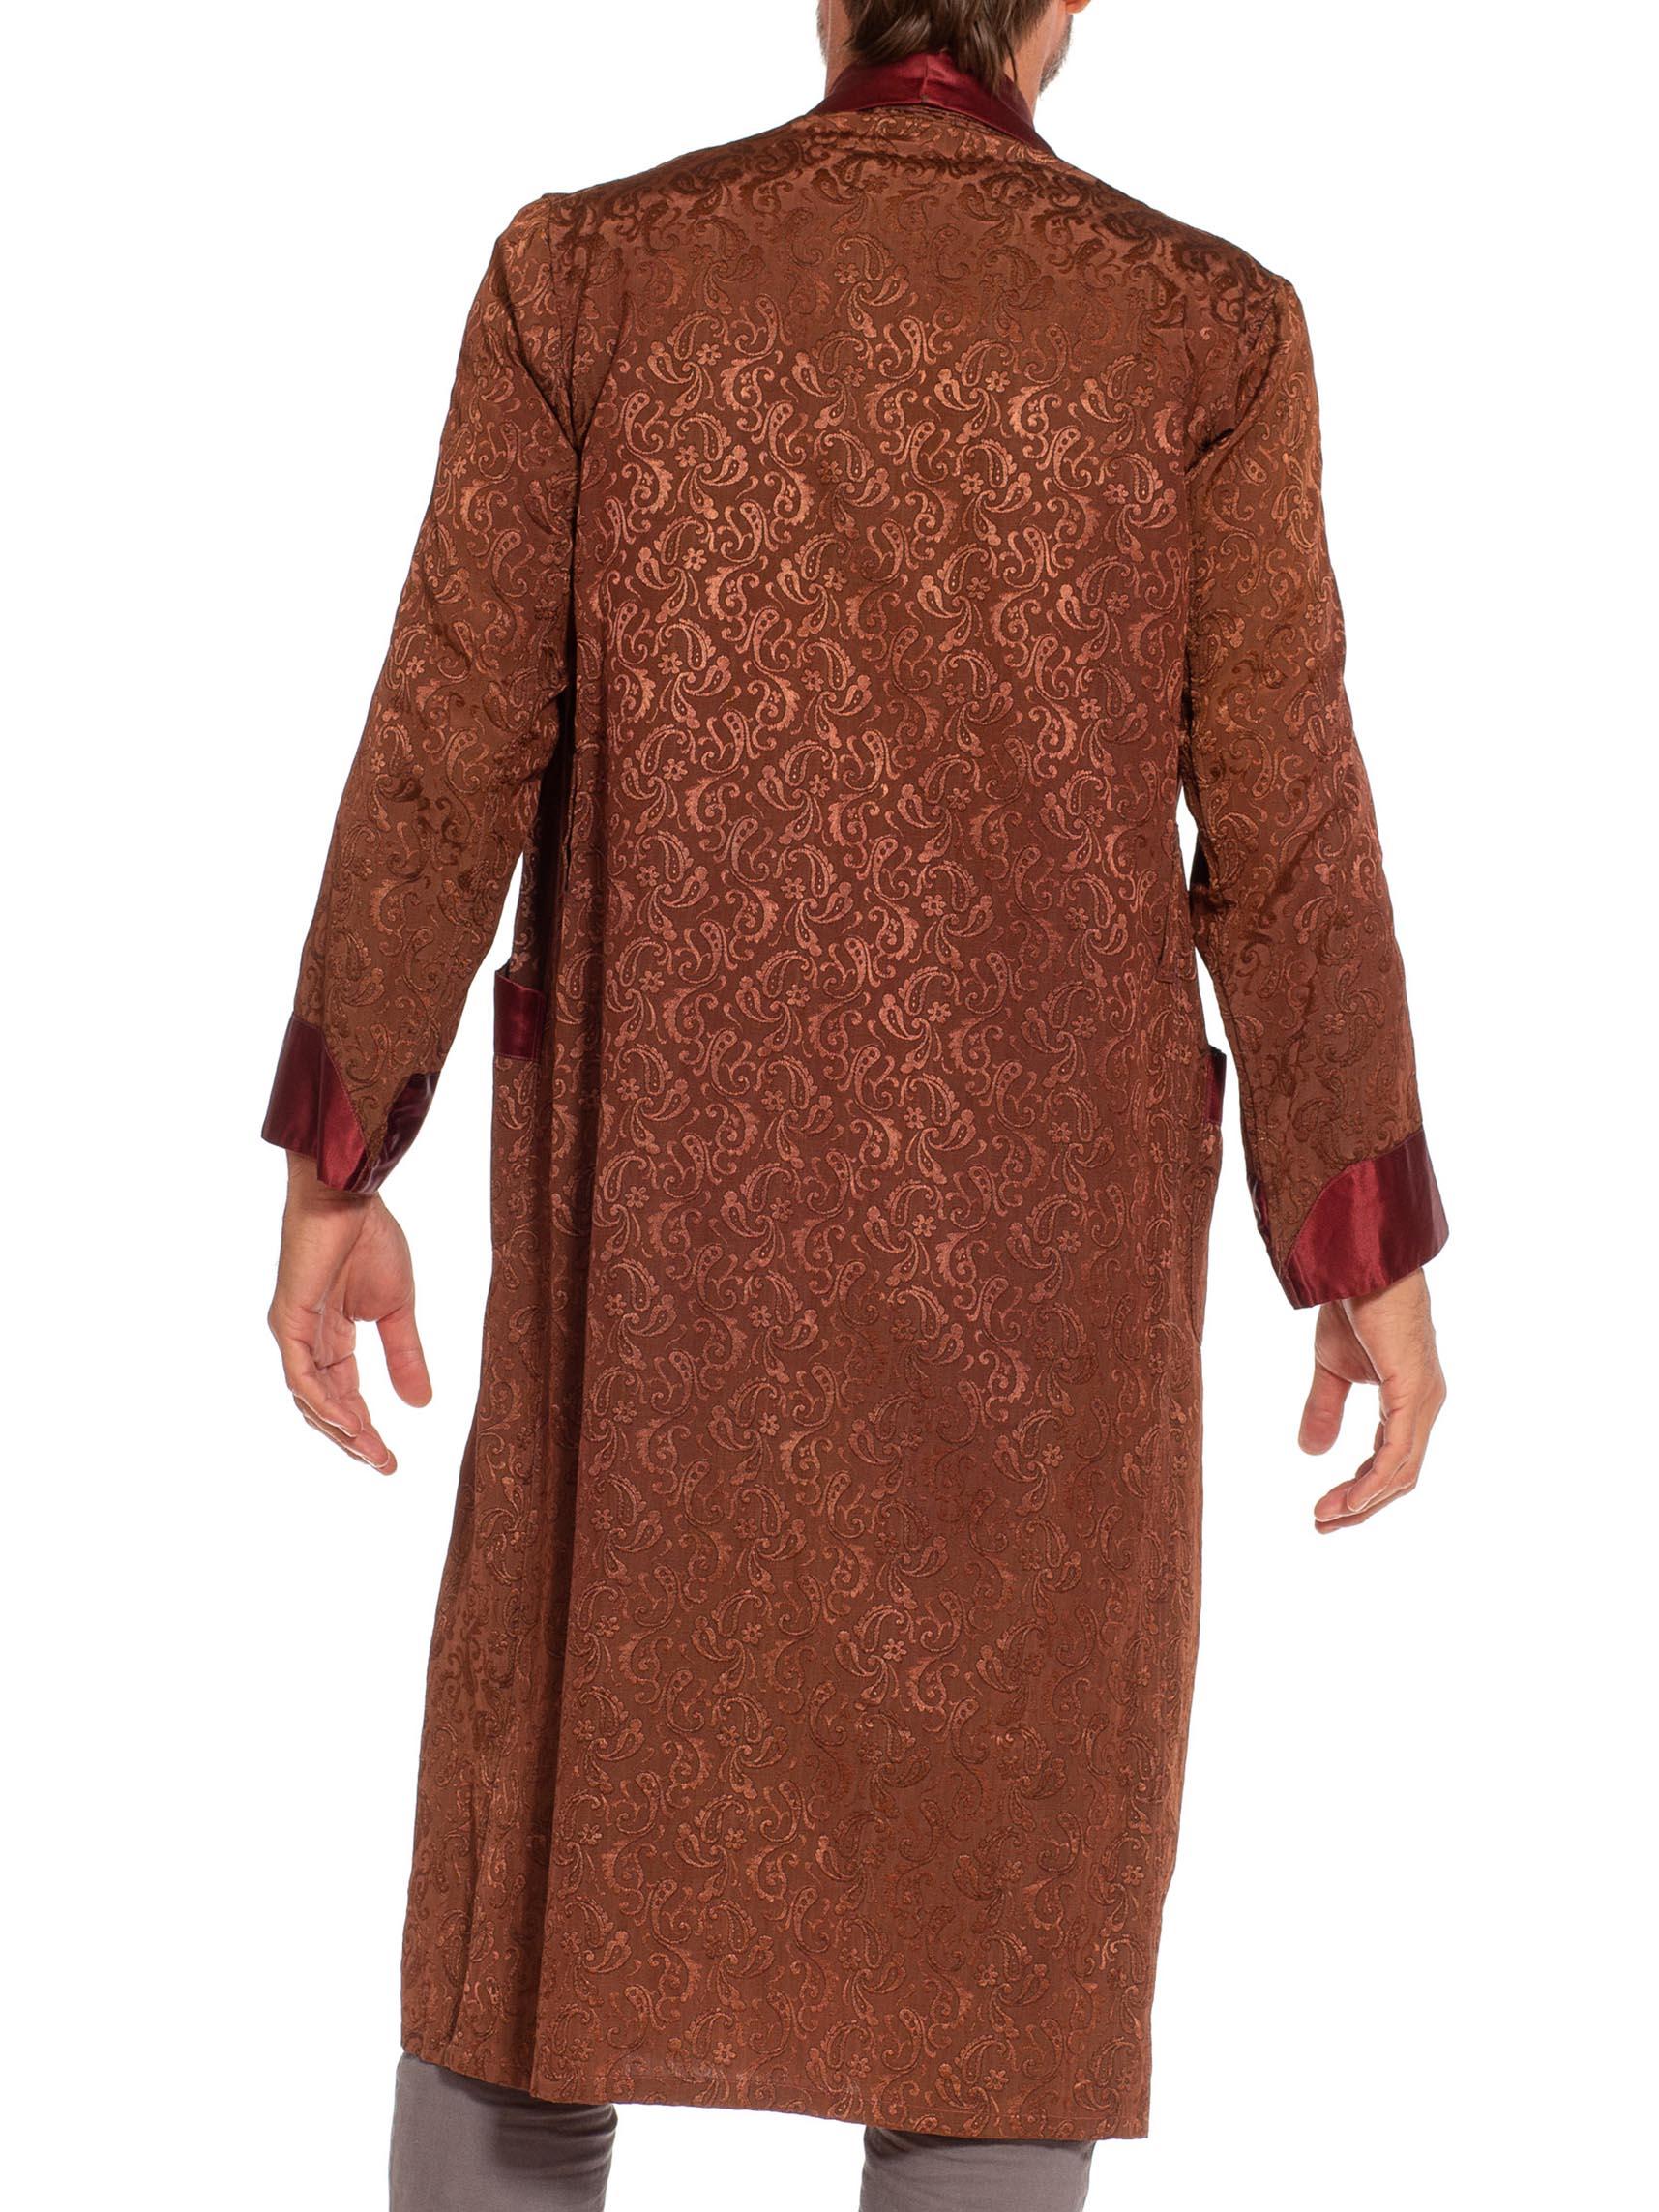 Men's 1930S Brown & Burgundy Paisley Rayon Jacquard Rare Button Robe With Silk Satin  For Sale